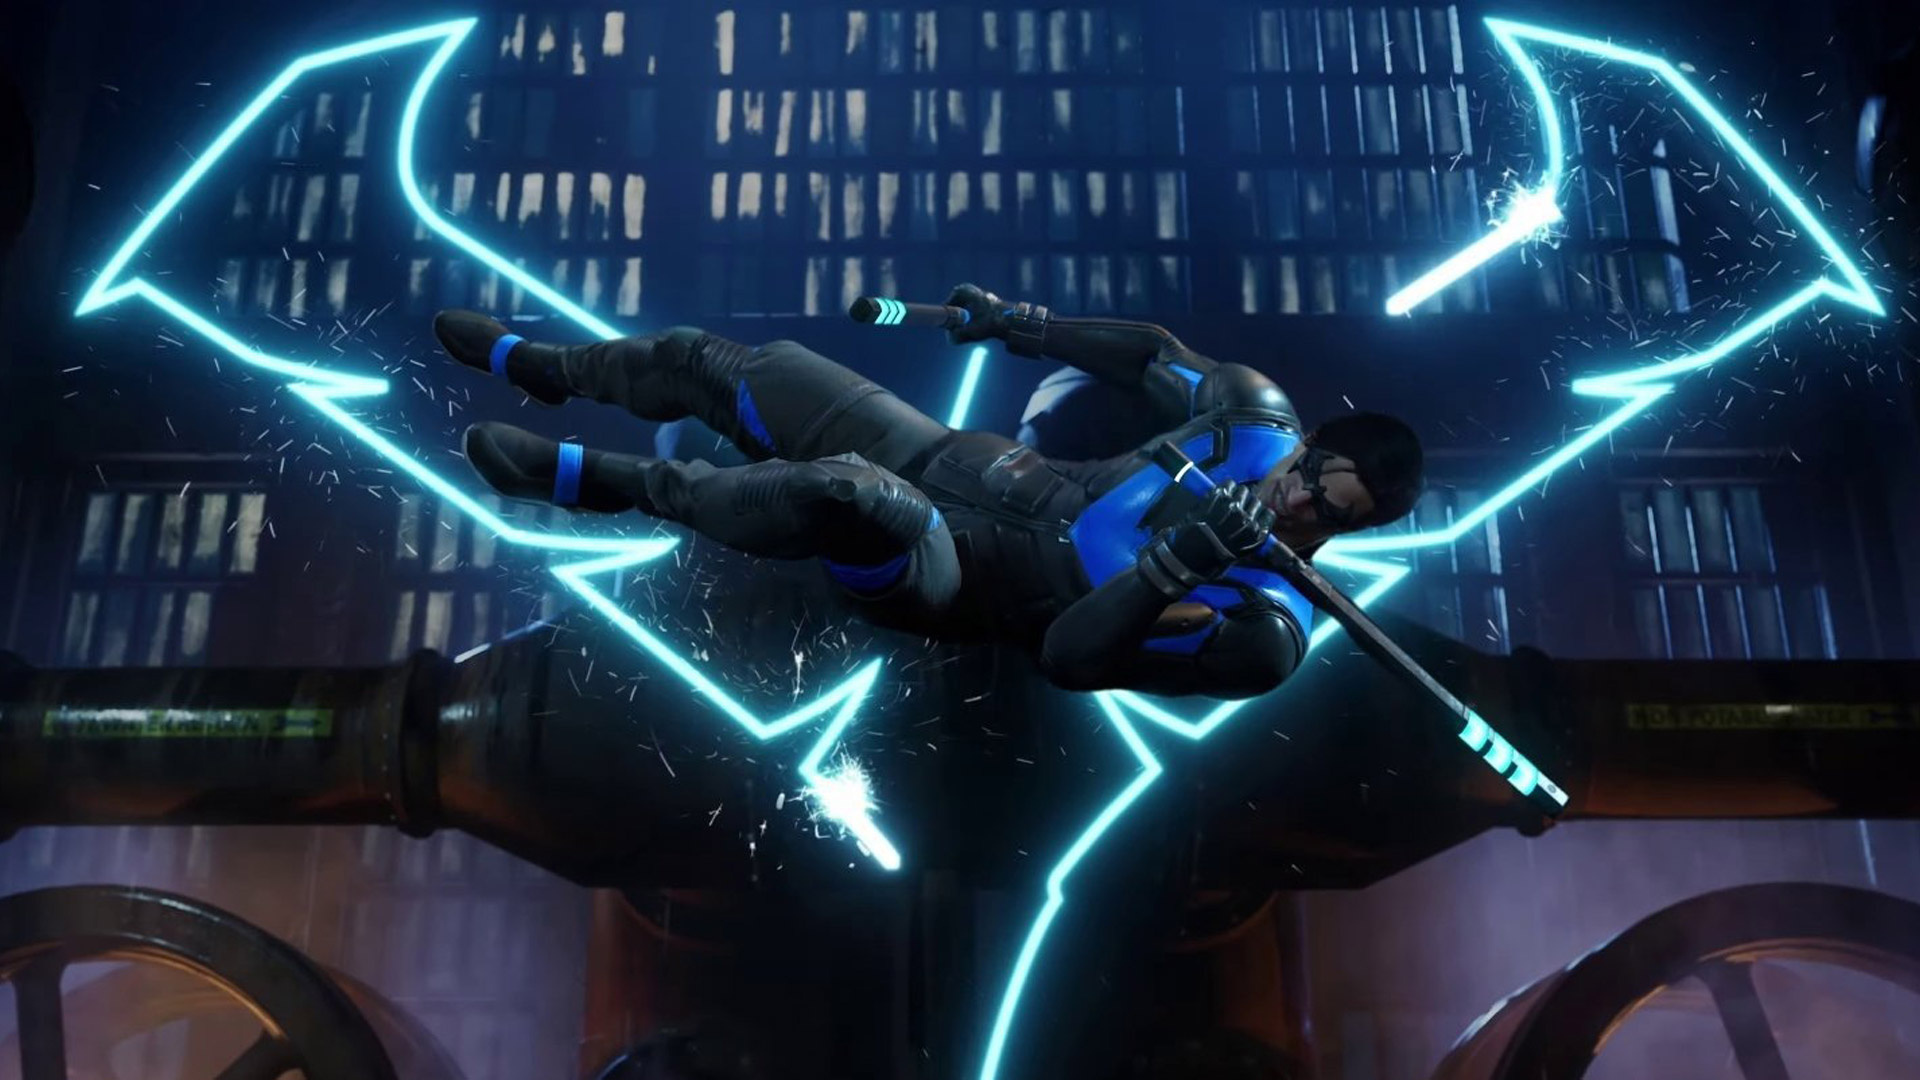 Gotham Knights (Game): Nightwing, The most agile of all the playable characters. 1920x1080 Full HD Background.